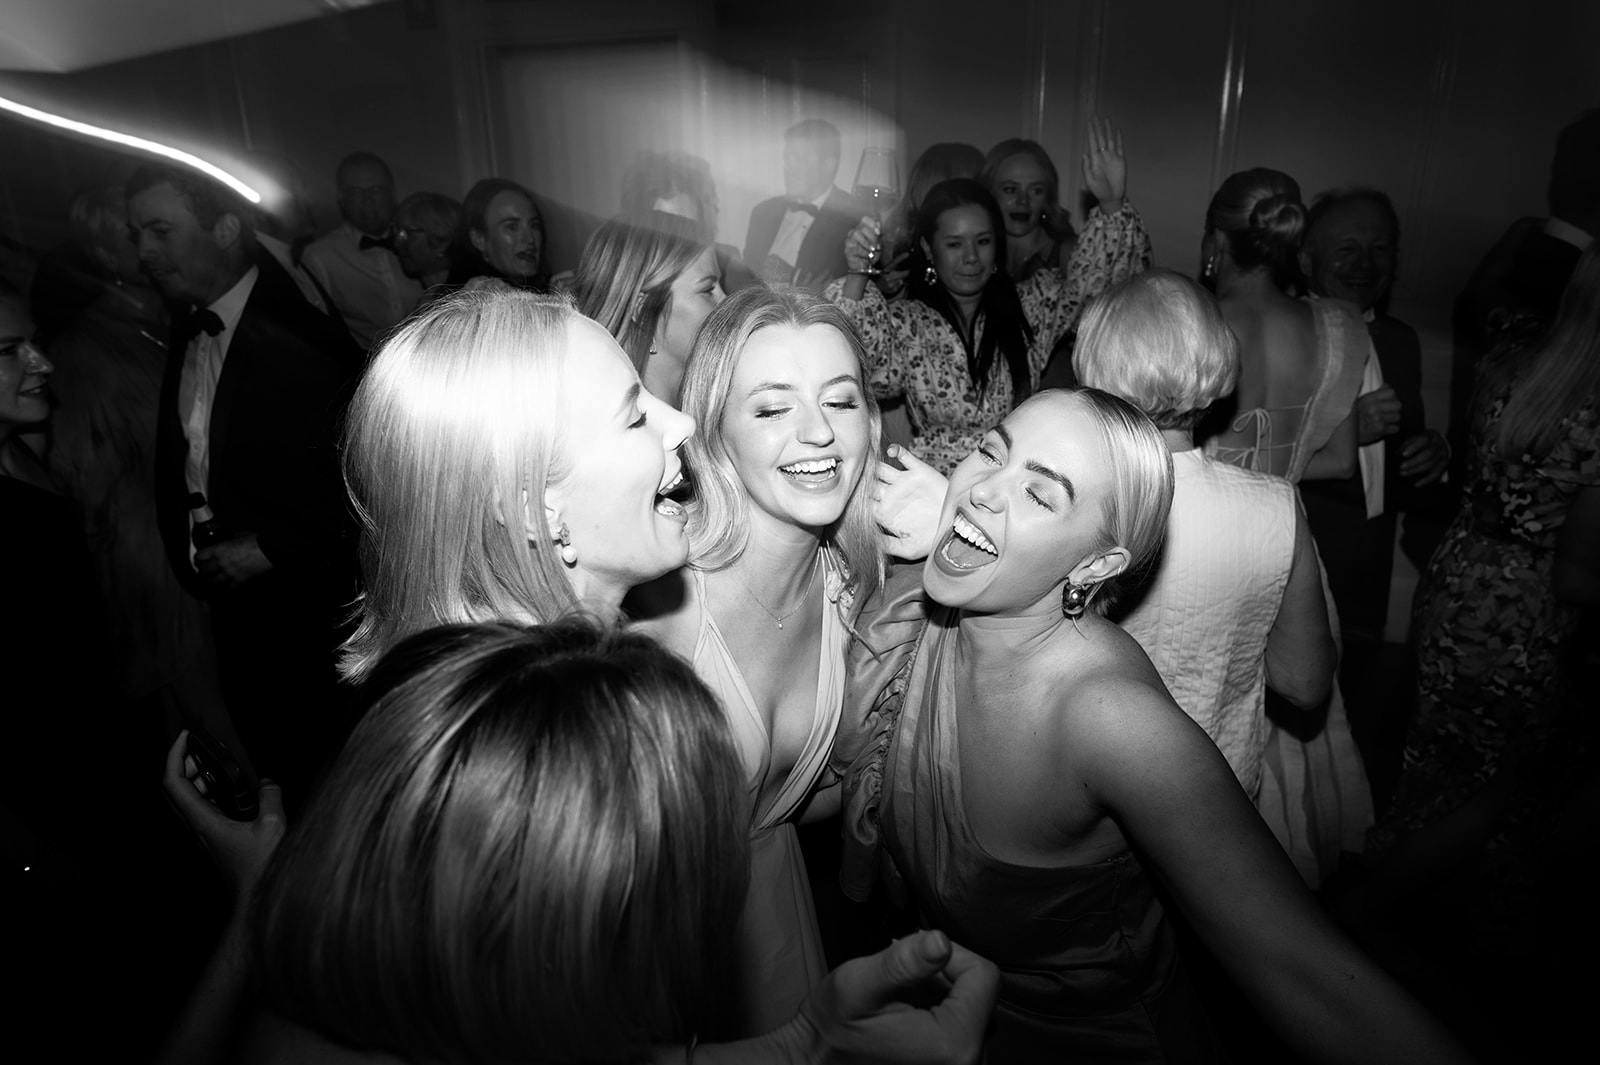 A black and white photo of a lively, crowded party. Three women, smiling and with eyes closed, are in the foreground. They appear to be enjoying themselves, surrounded by a joyful crowd in the background. One woman holds a drink while others dance and celebrate.